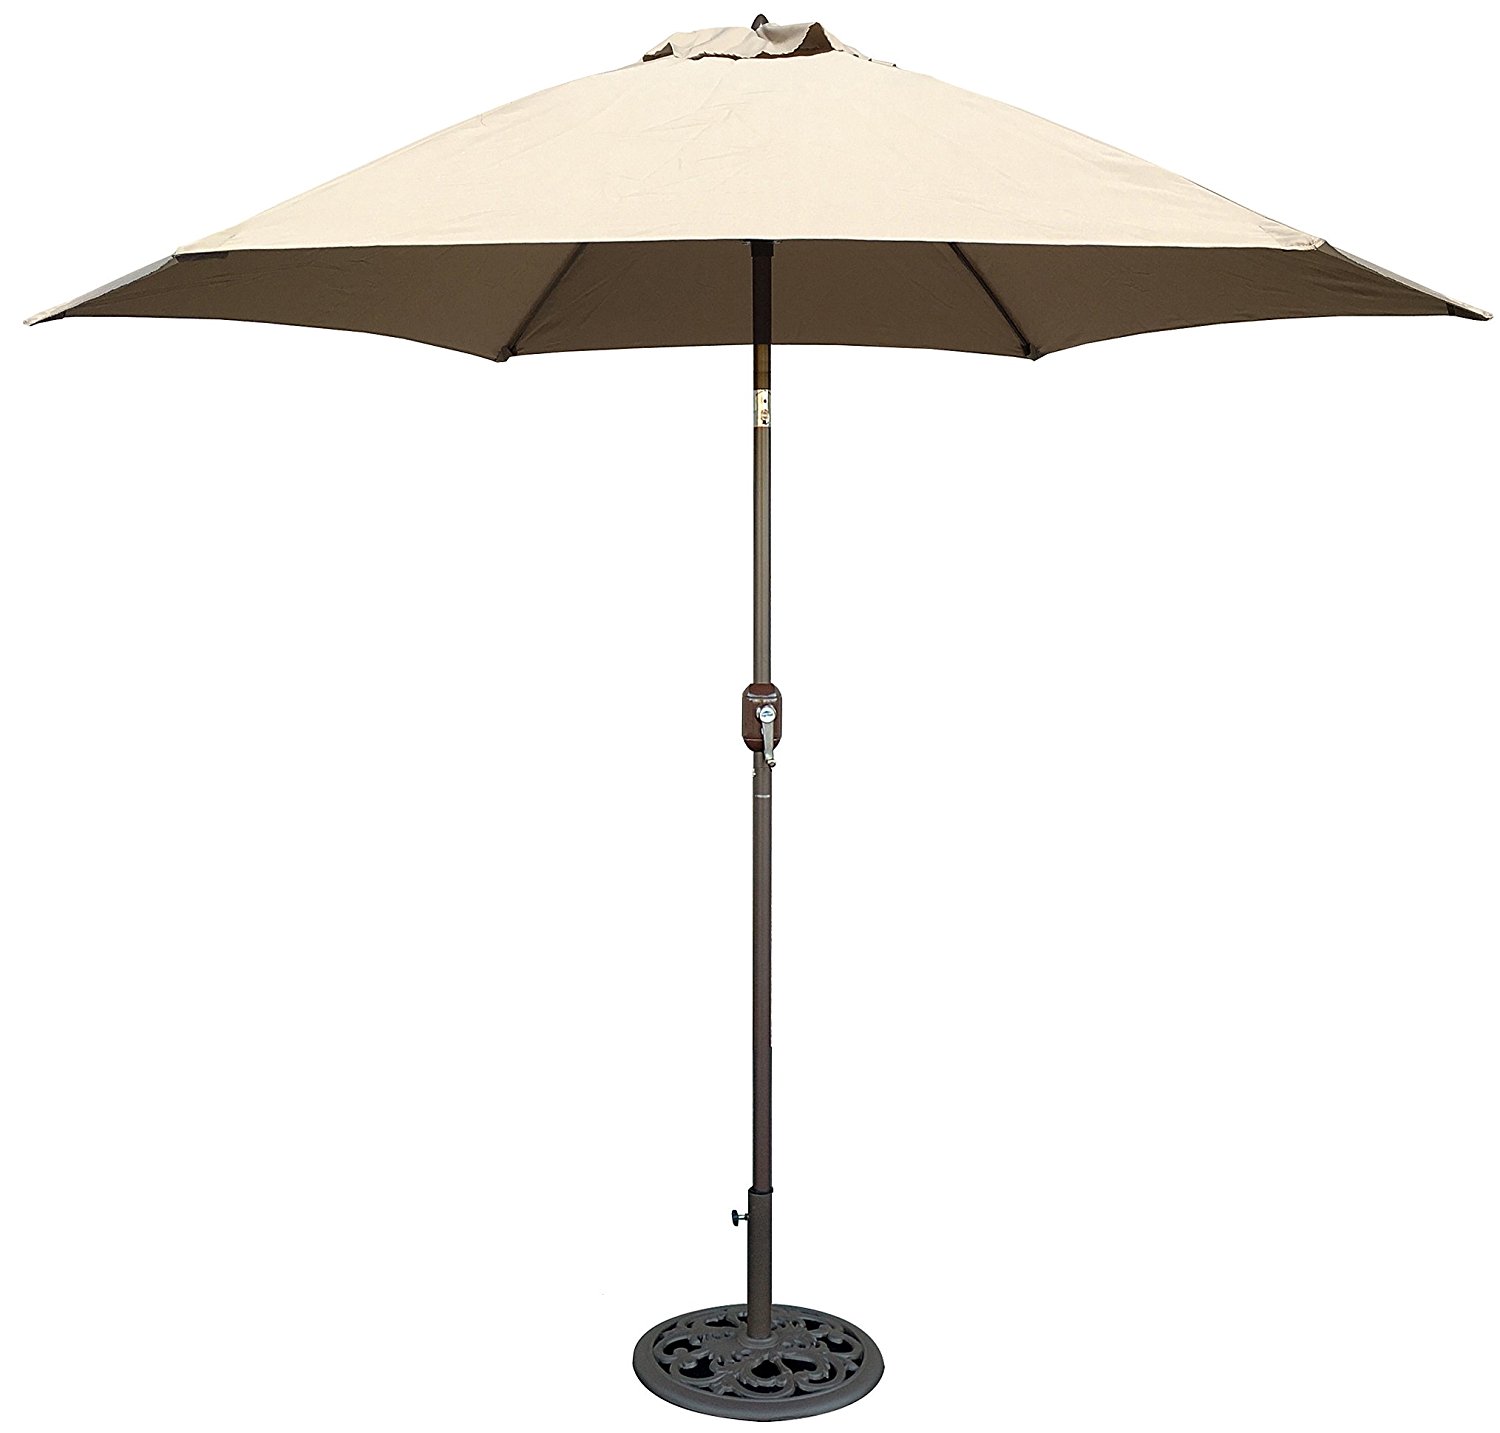 Review of Tropishade 9 ft Bronze Aluminum Patio Umbrella with Beige Polyester Cover